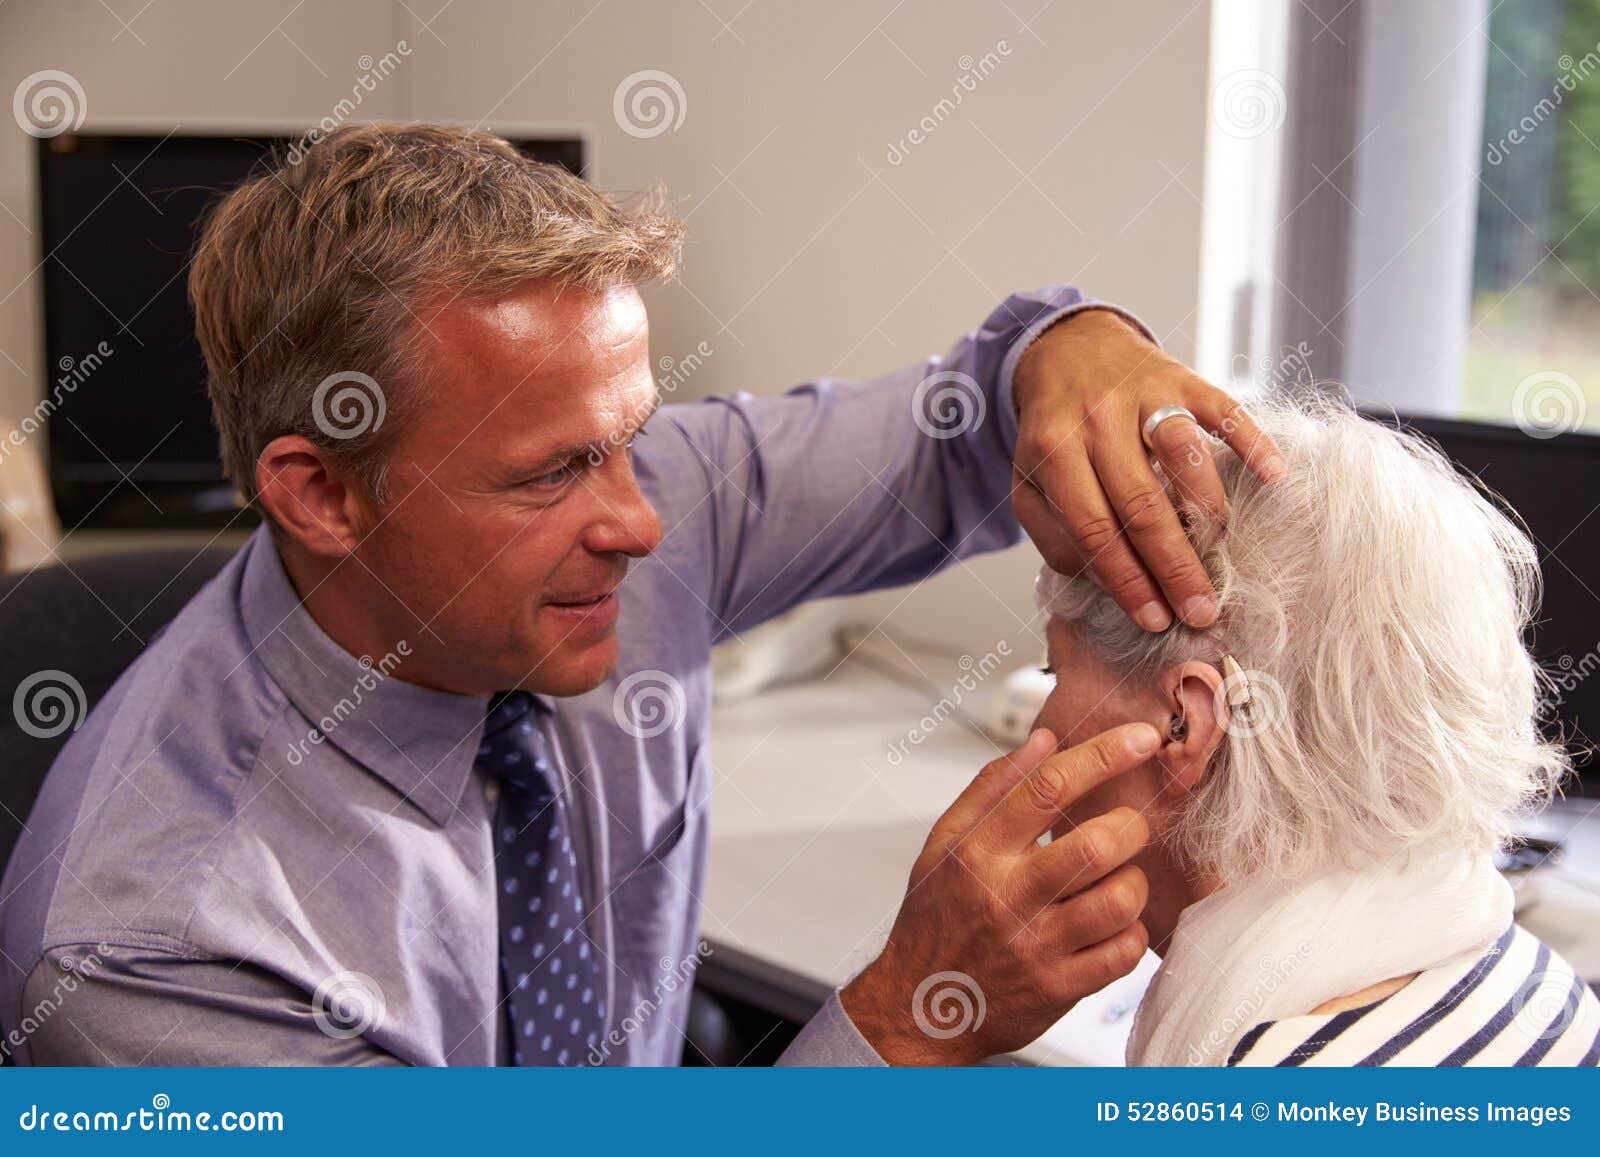 doctor fitting senior female patient with hearing aid